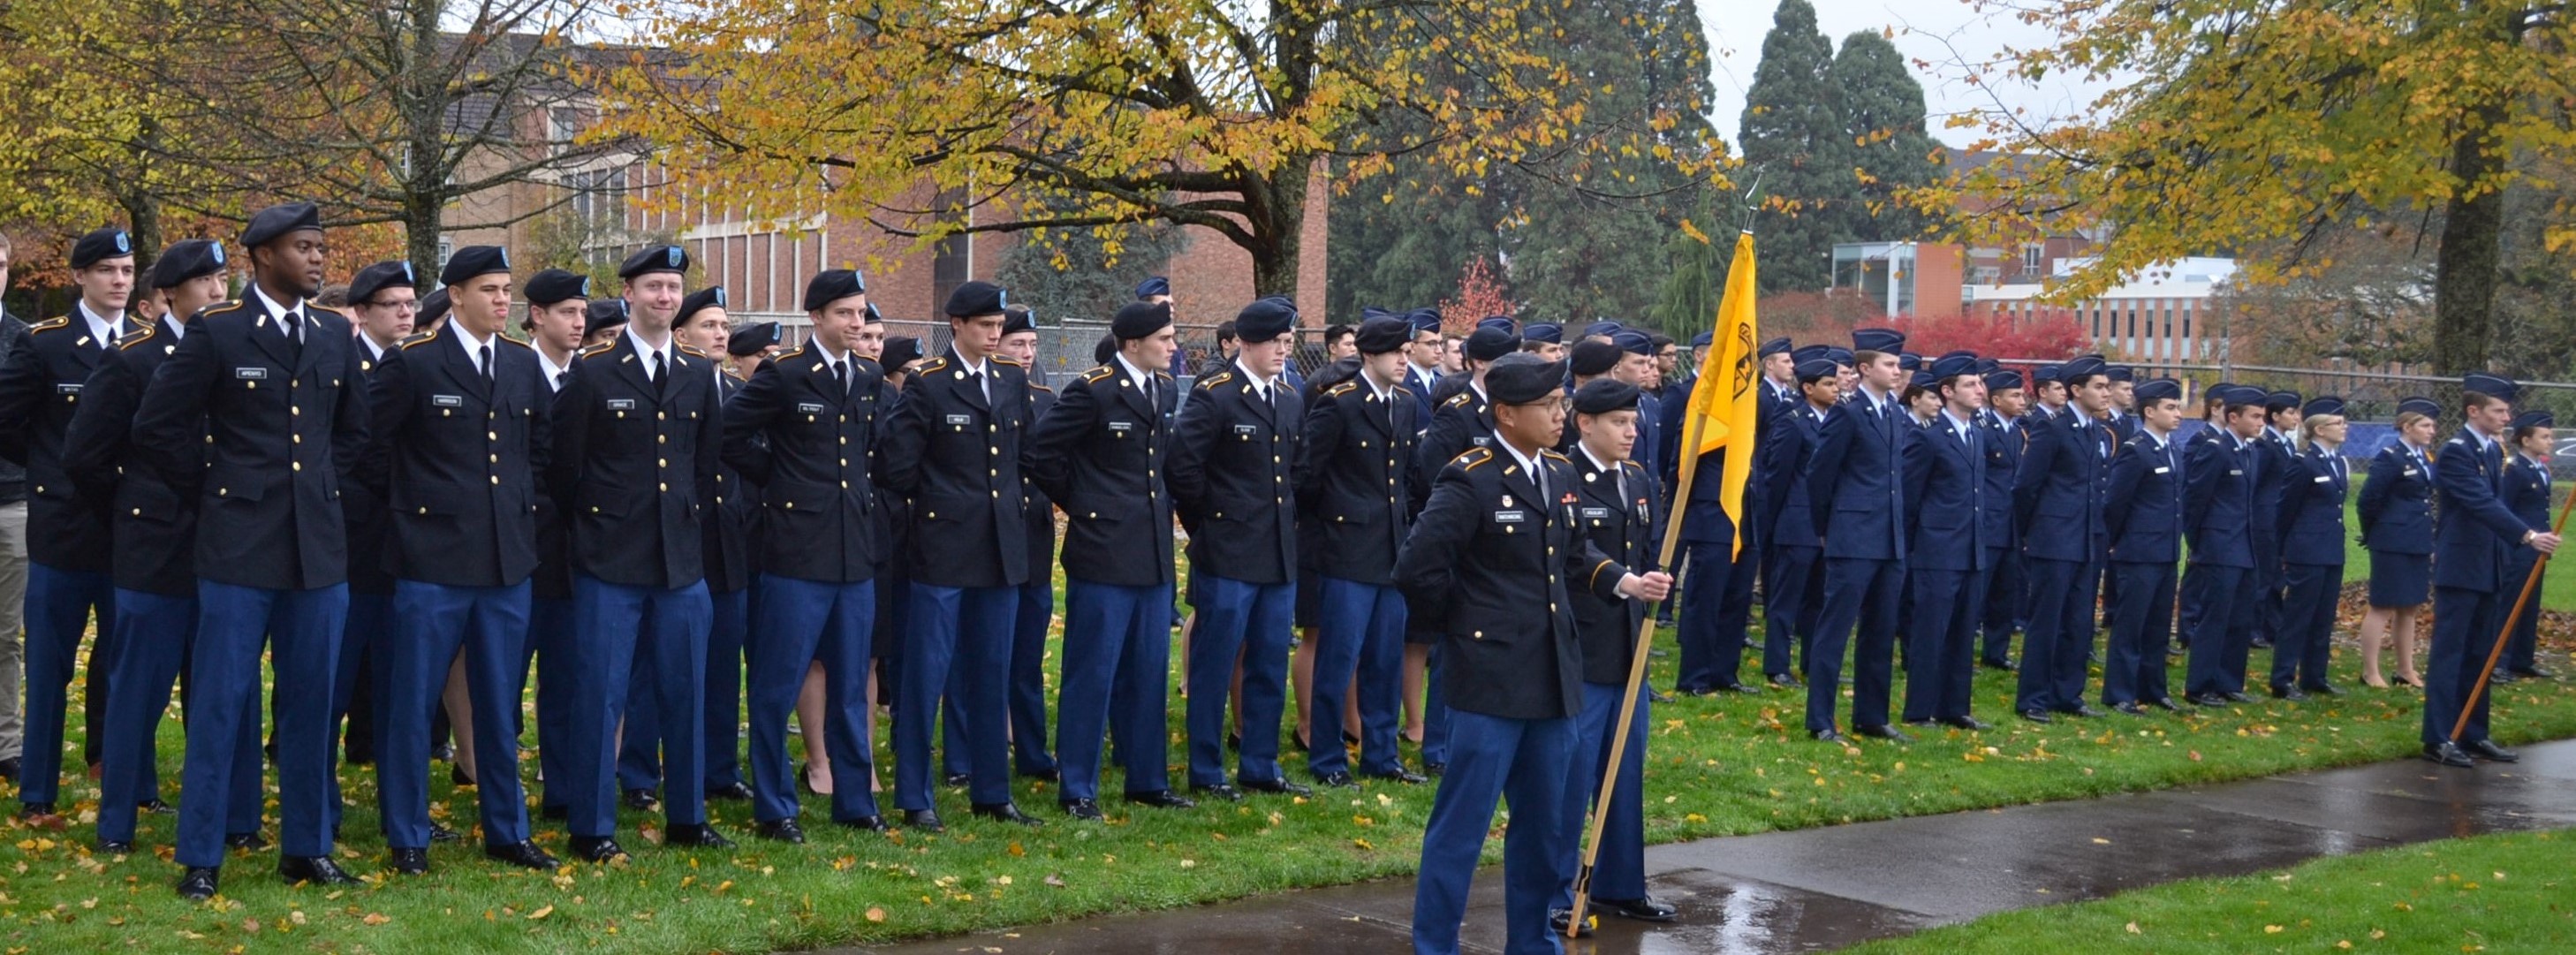 Cadets in formation for 2017 Veteran's Day ceremony.